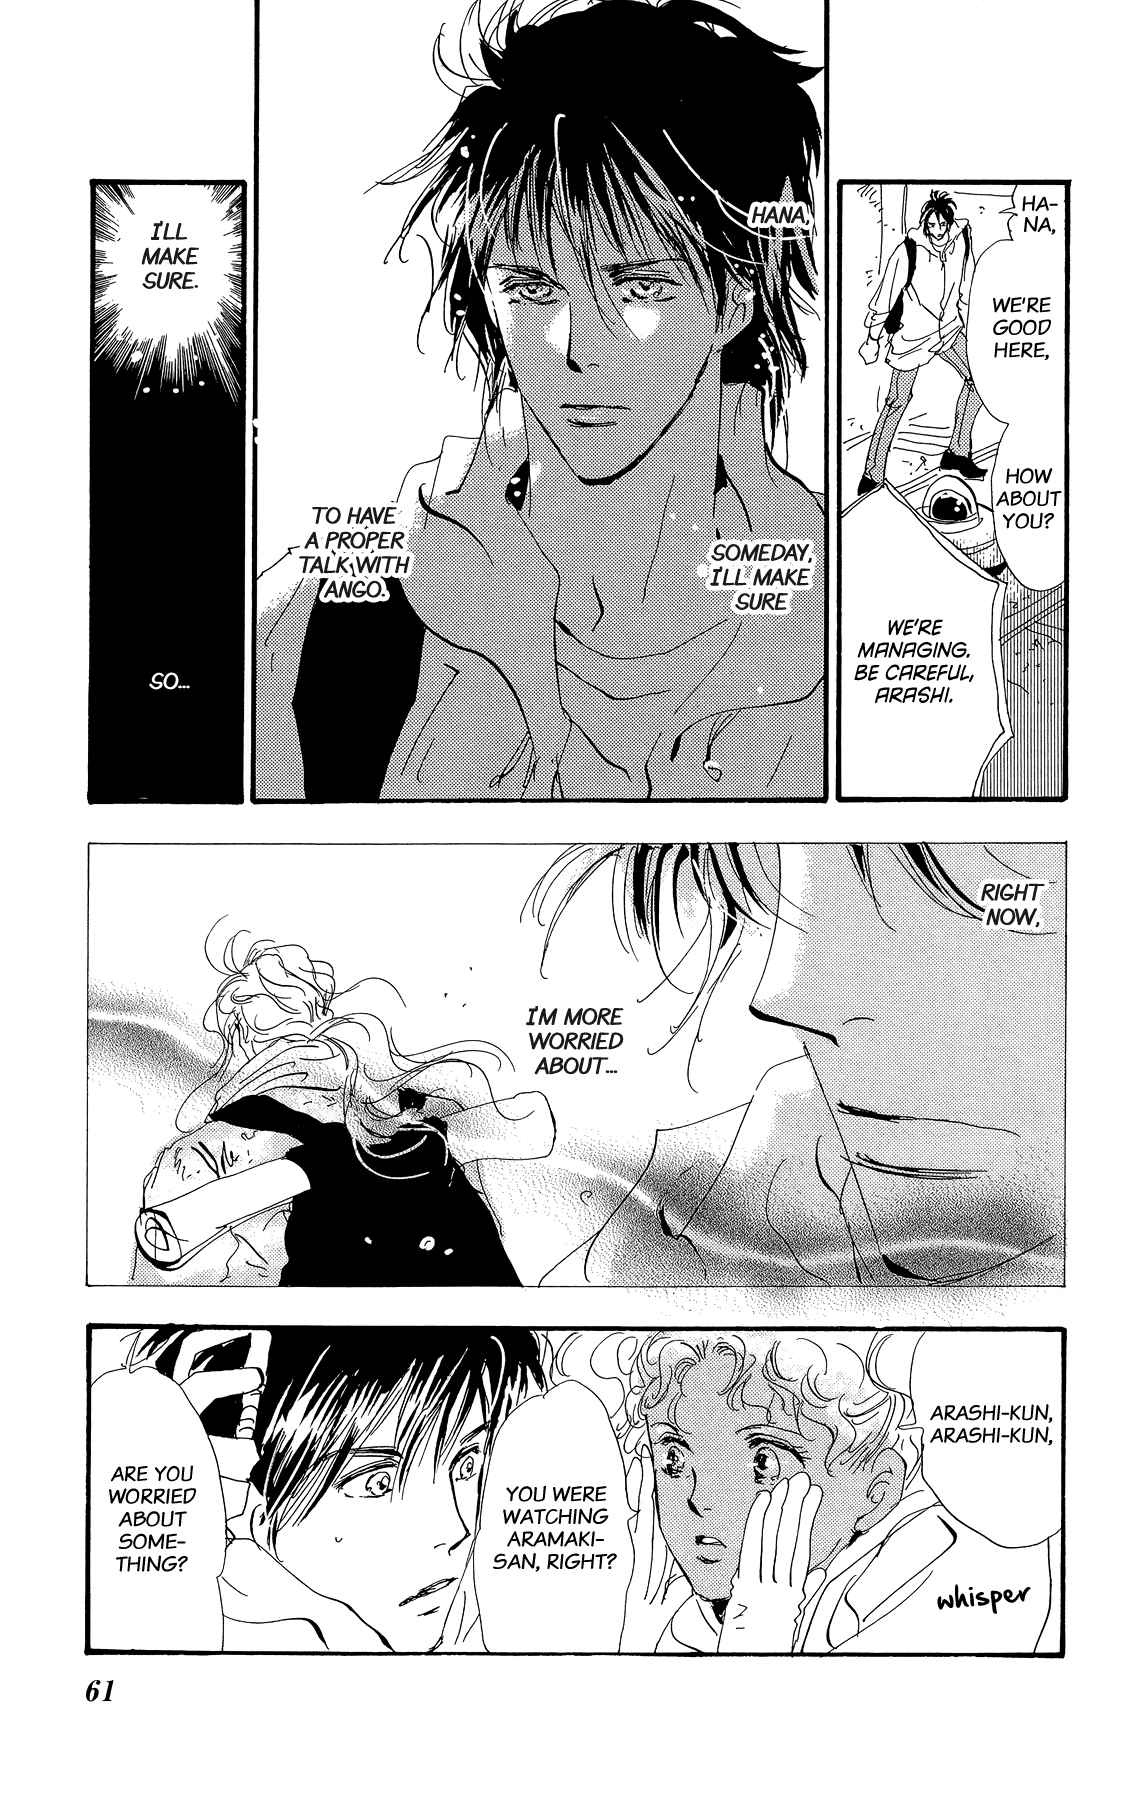 7 Seeds Vol. 32 Ch. 163 Mountains Chapter 28 [Calm]